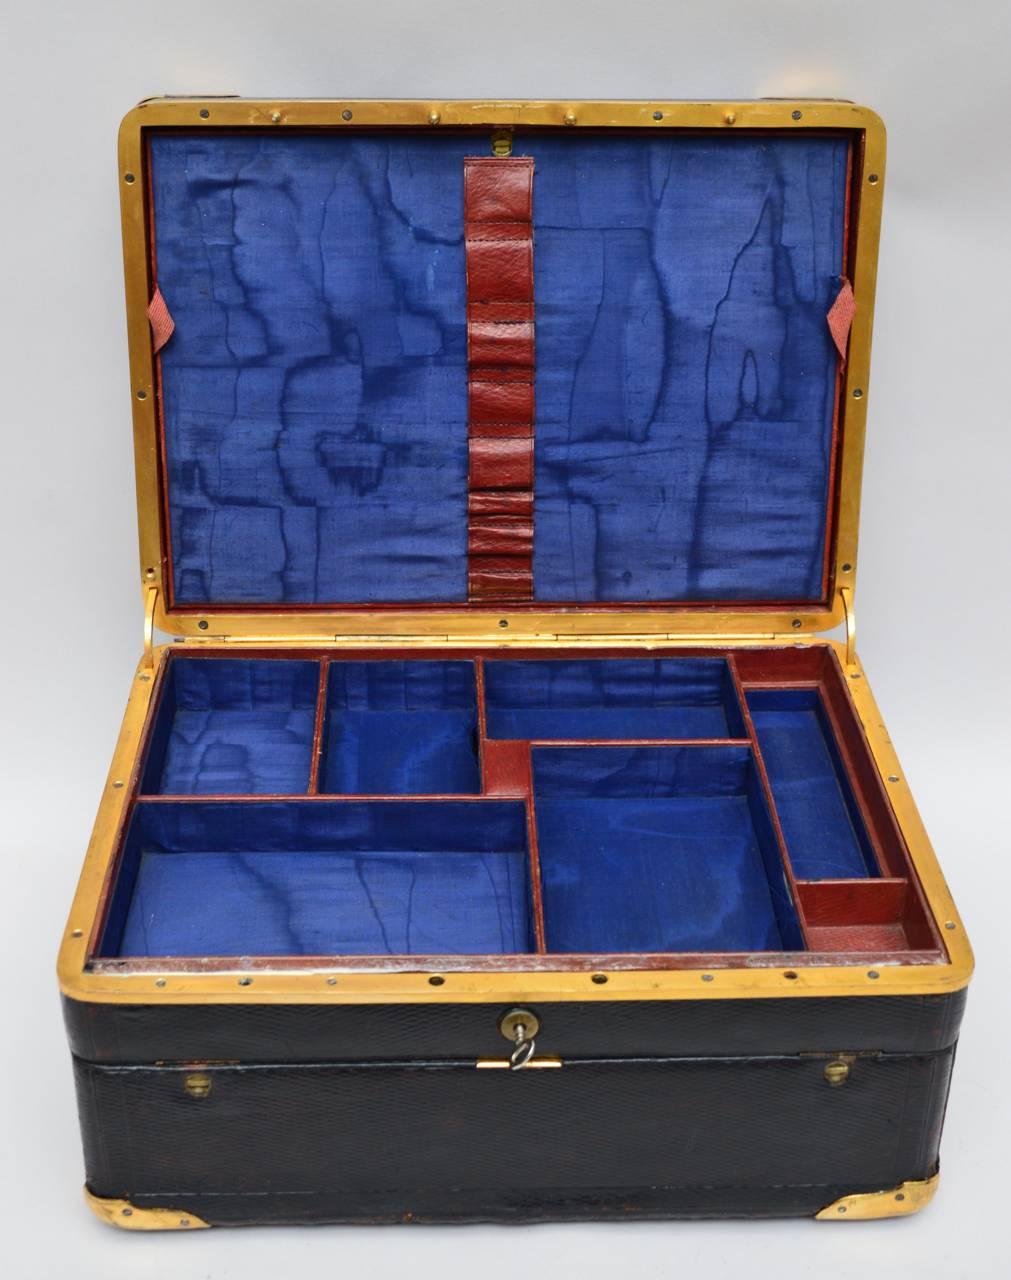 A French travel box, circa 1900. Many royal blue silk lined compartments to hold cufflinks, watches and writing accessories. The interior of the lid opens to reveal a stepped leather envelope to hold stationary and documents. The front of the box